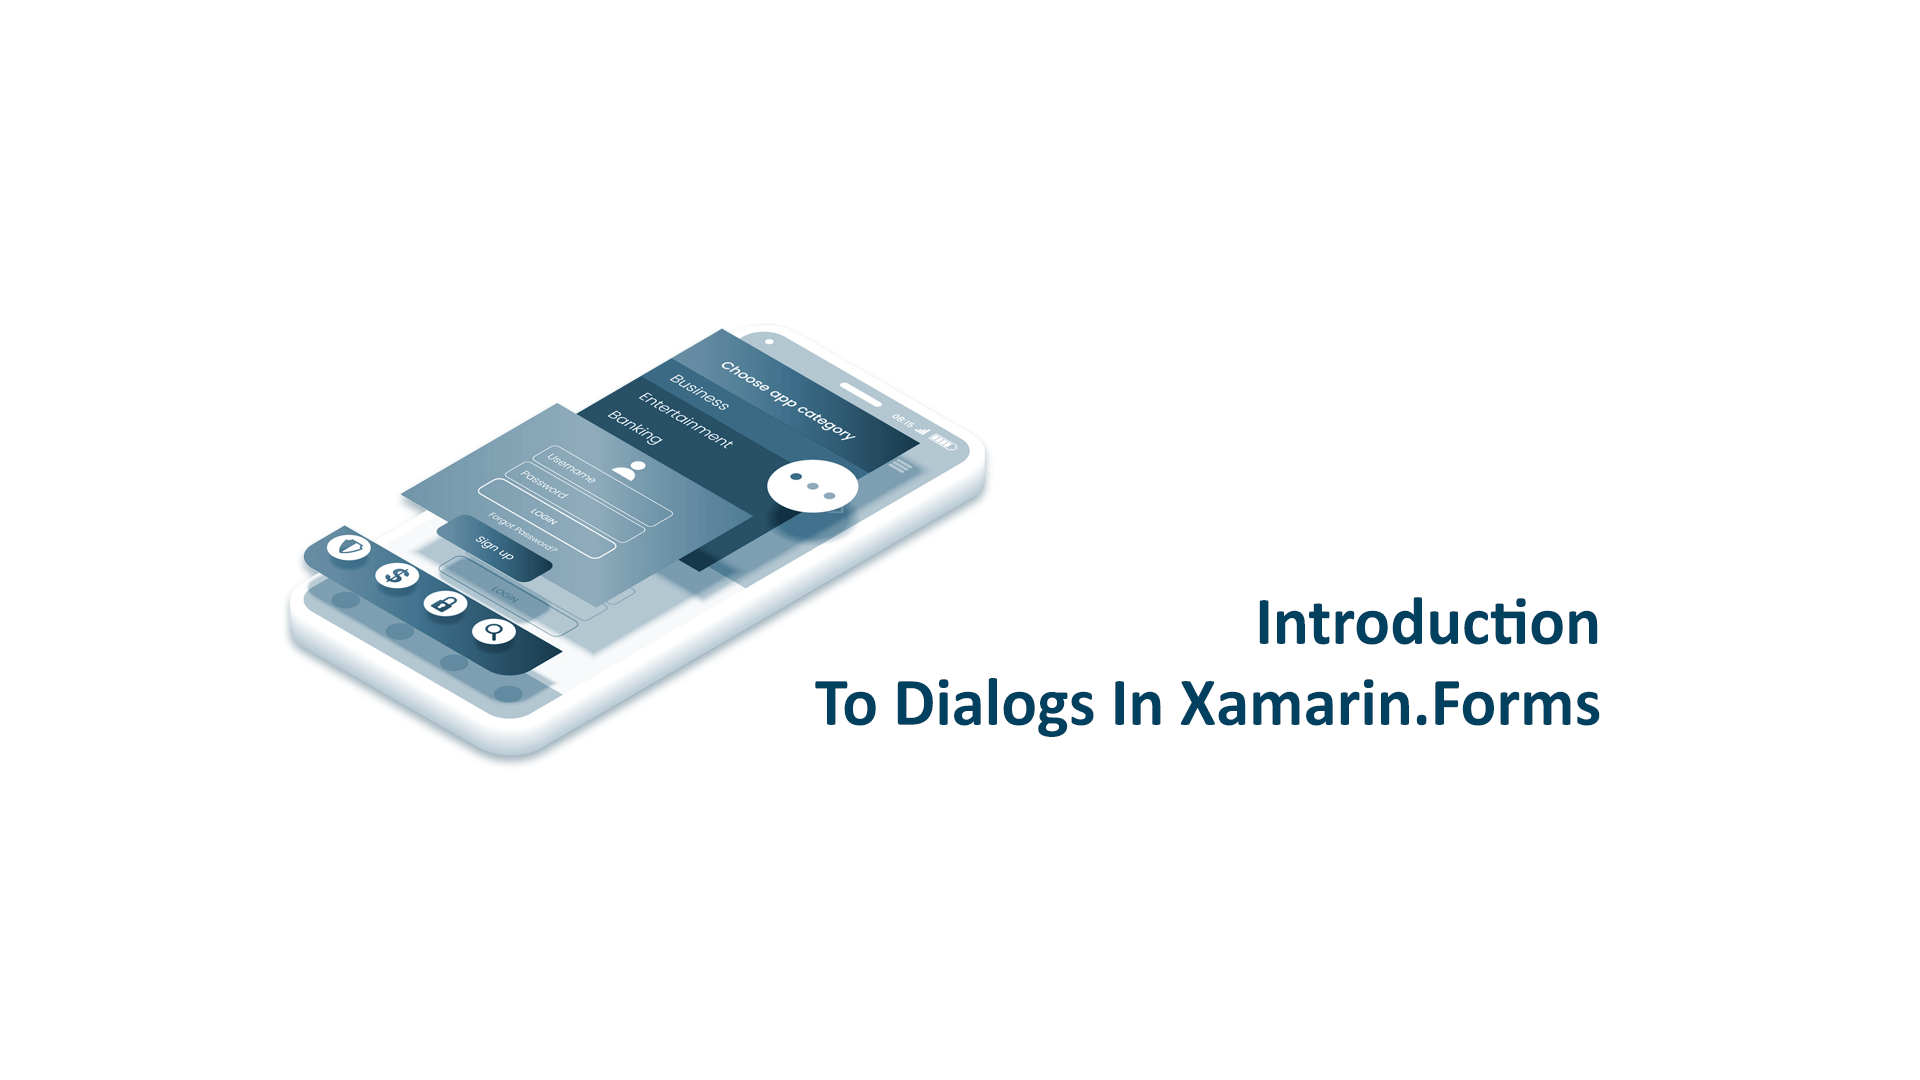 Introduction To Dialogs In Xamarin.Forms